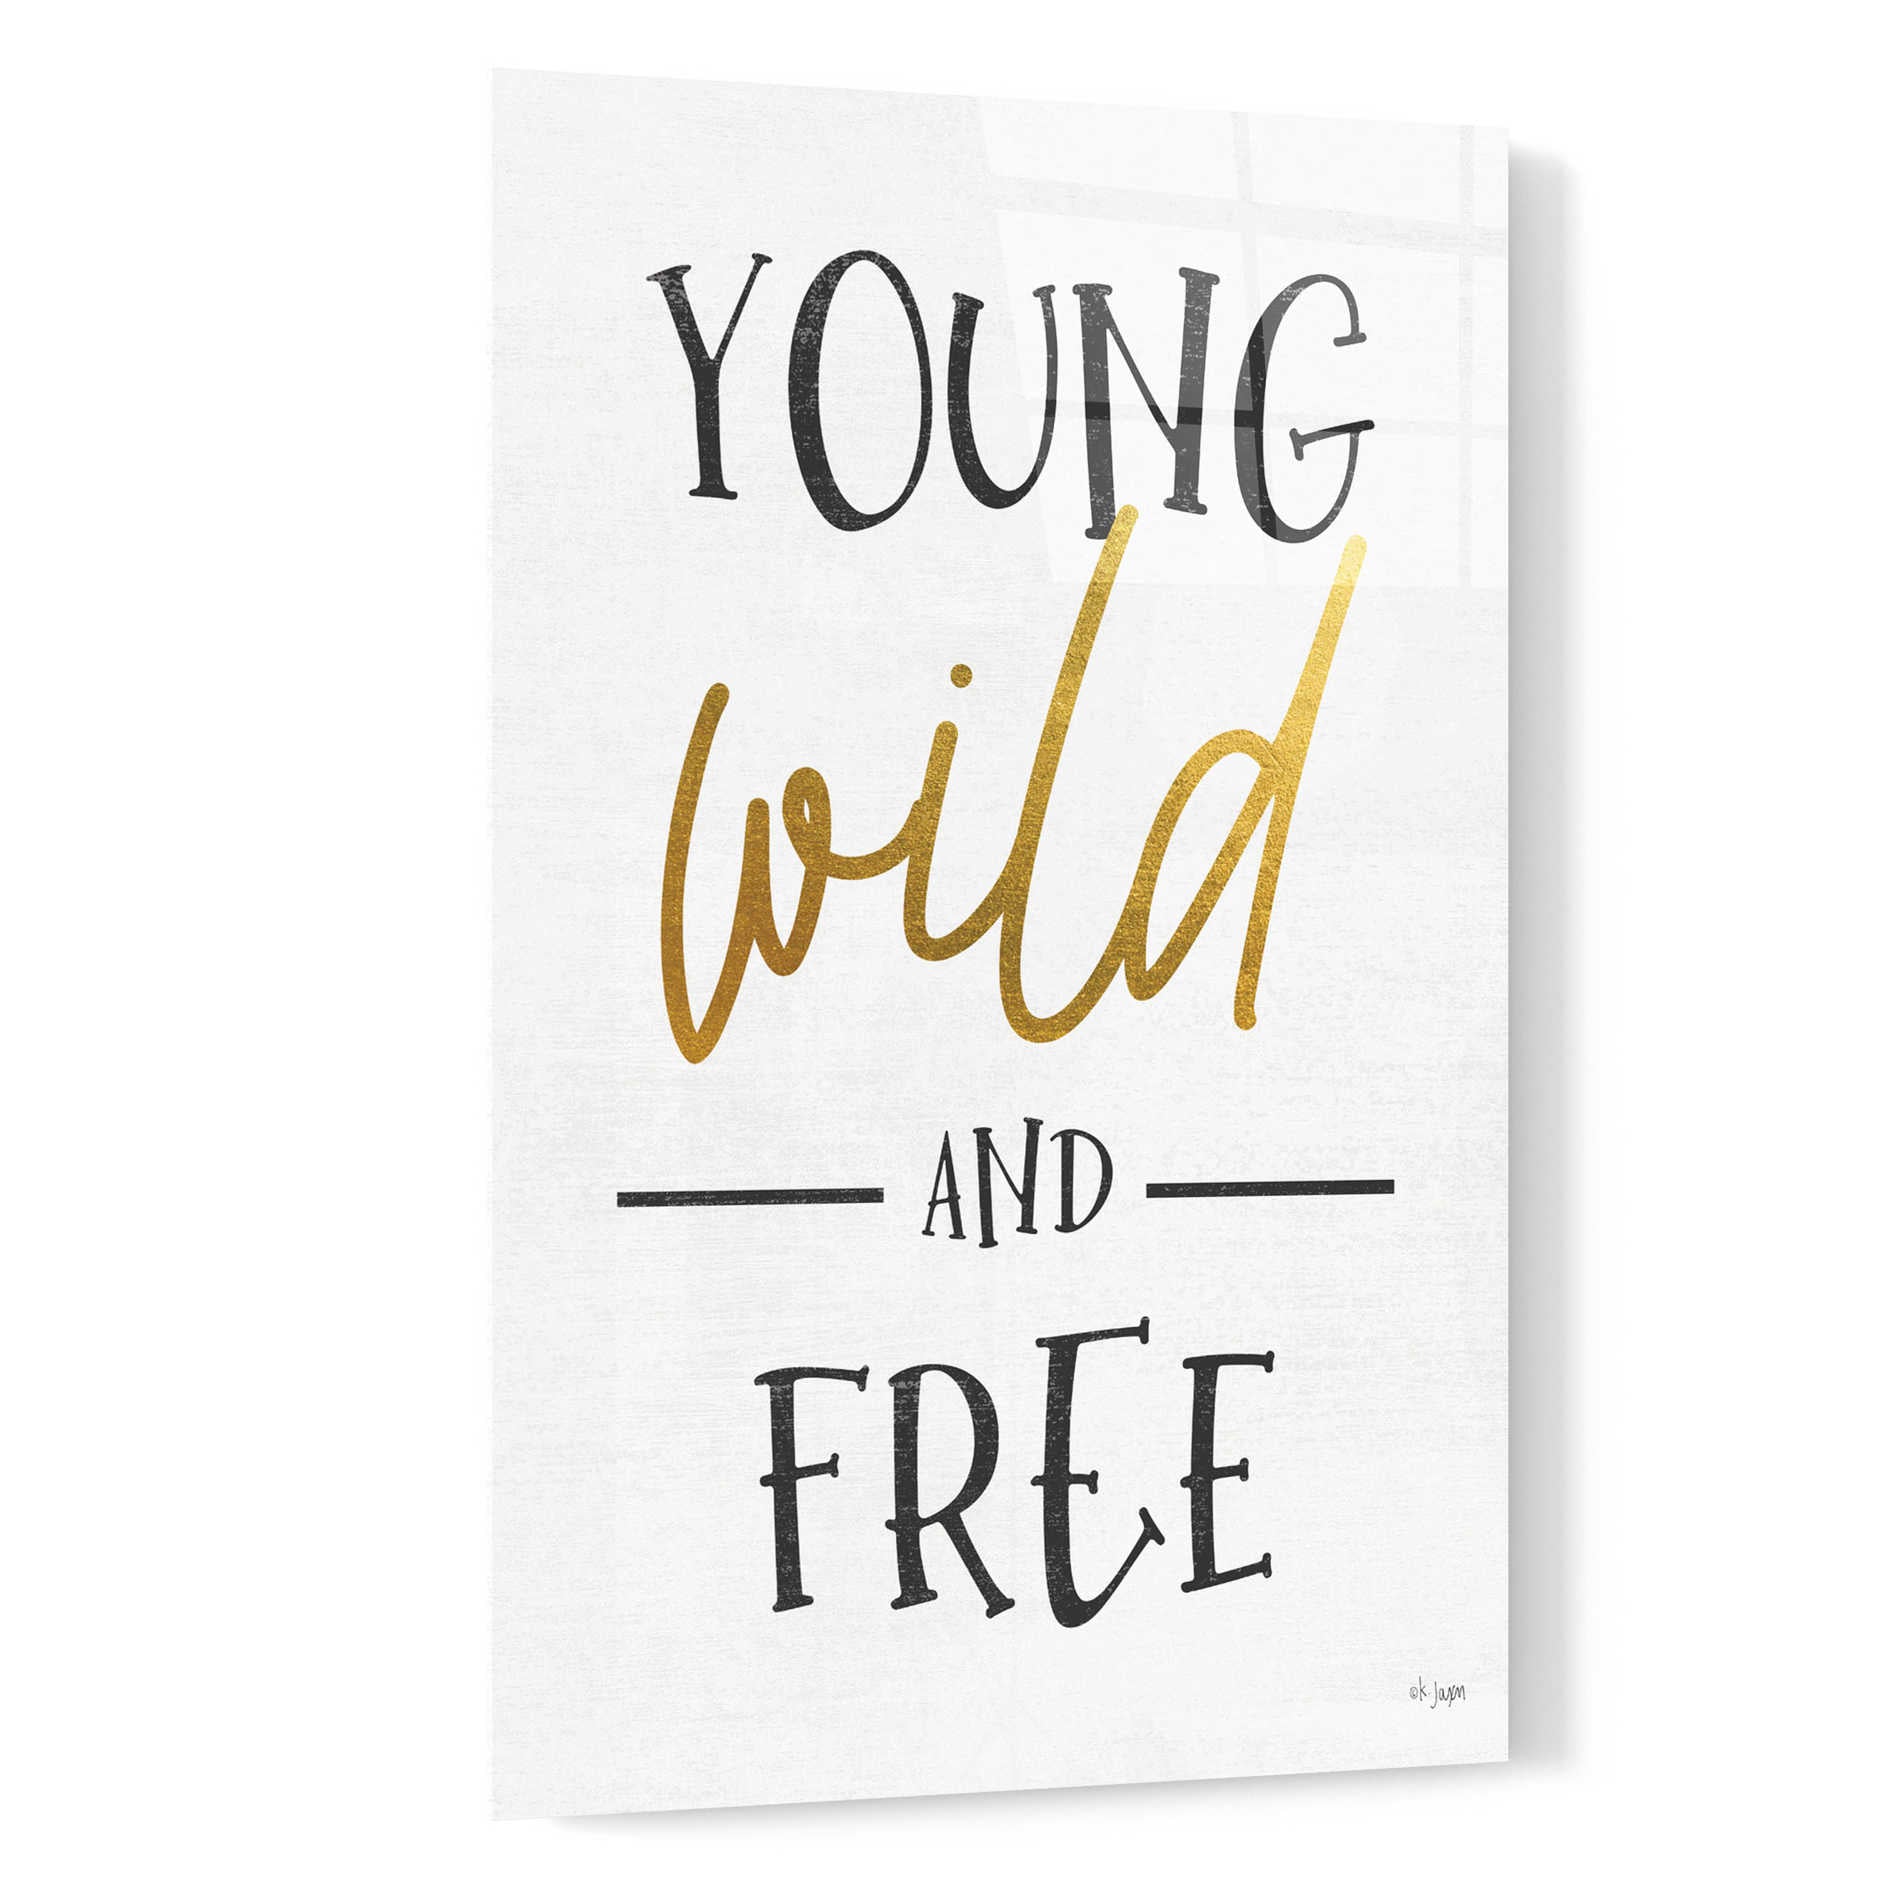 Epic Art 'Young, Wild and Free' by Jaxn Blvd, Acrylic Glass Wall Art,16x24